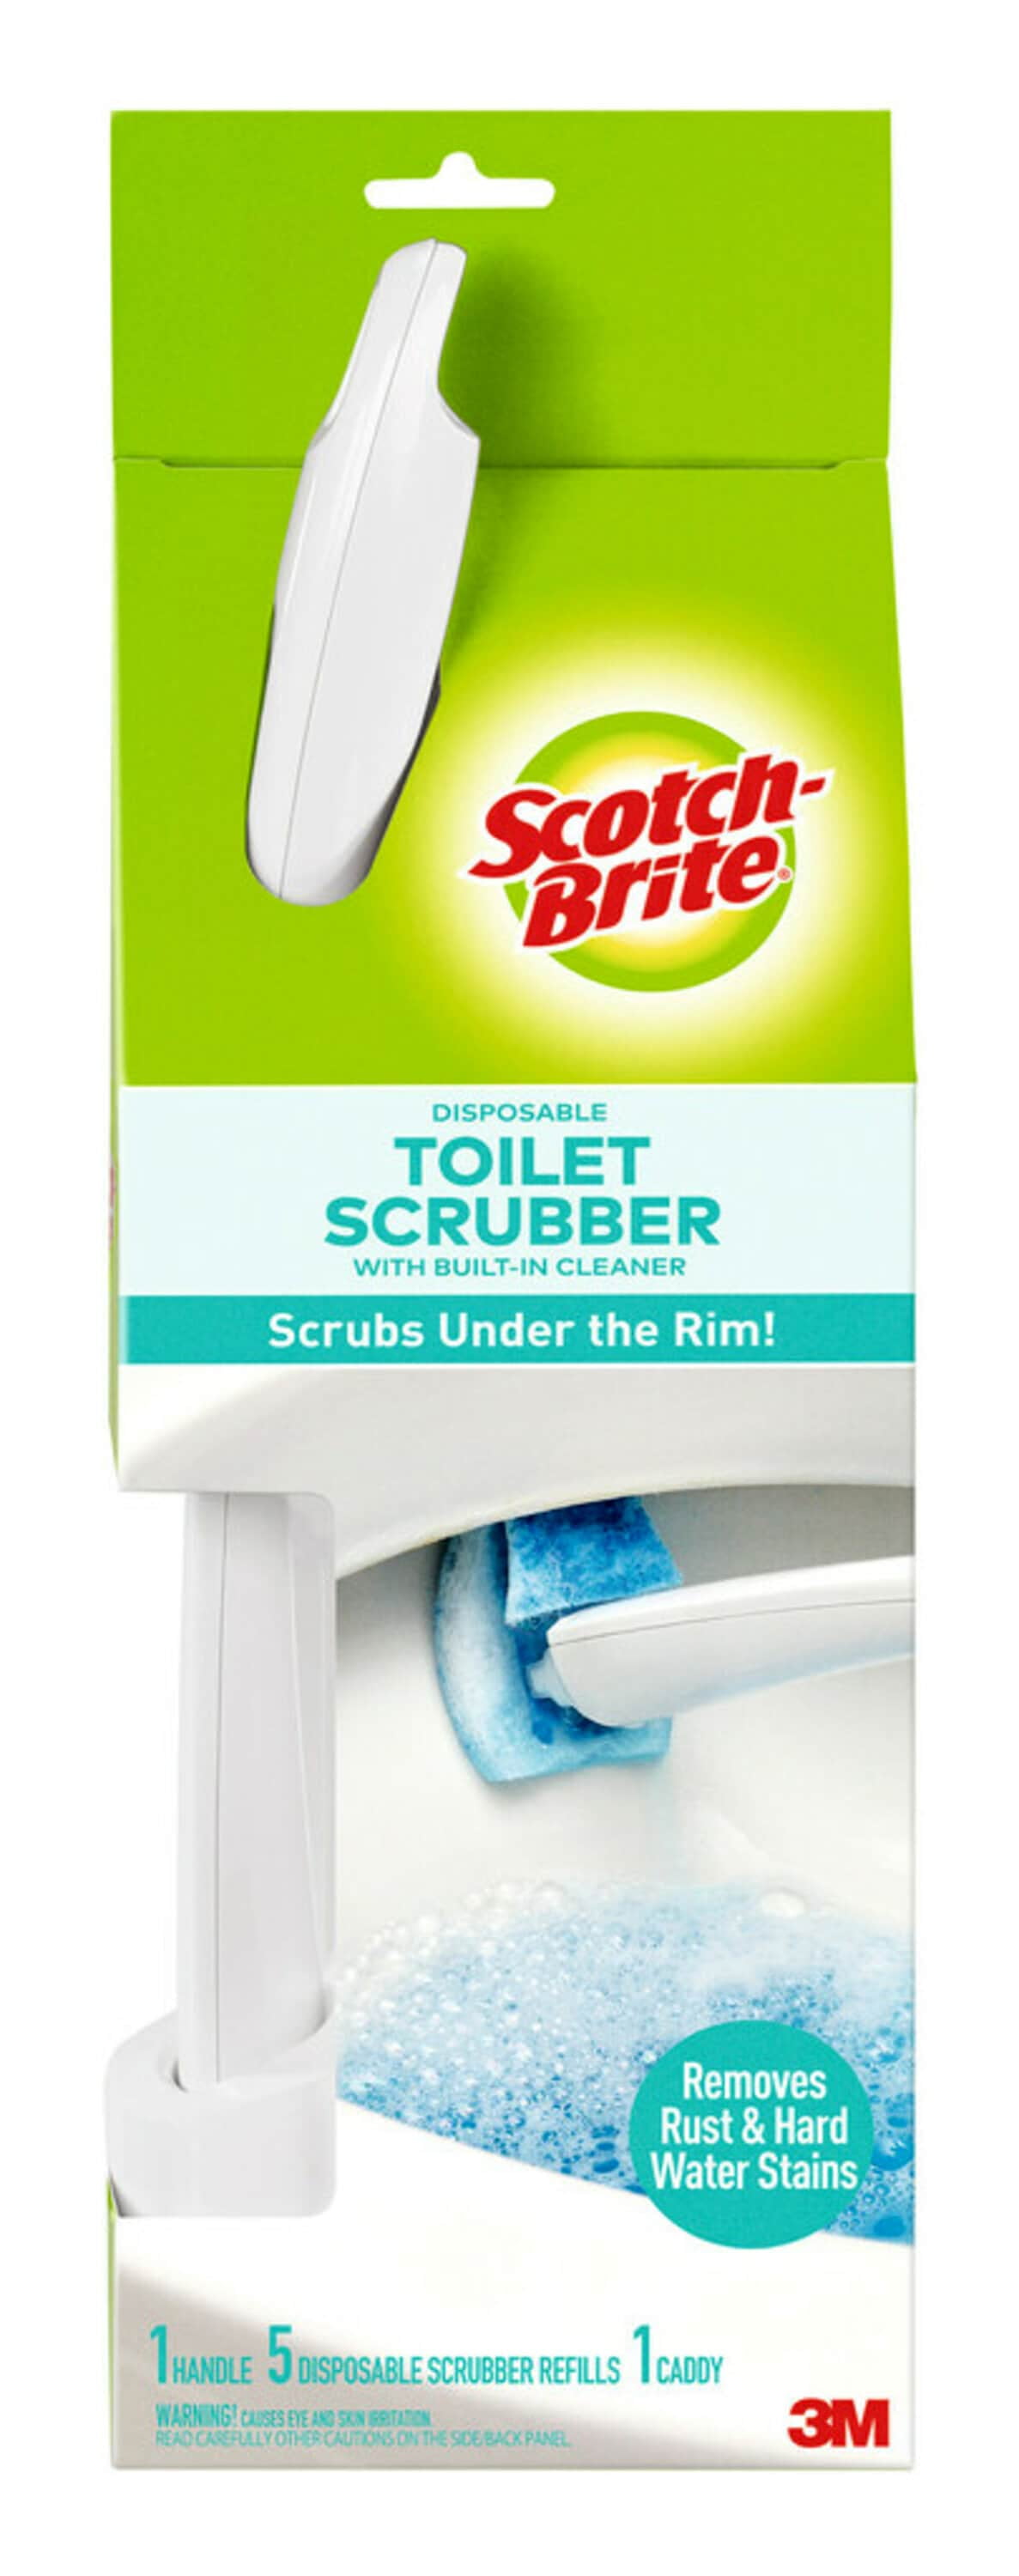 Scotch Brite Toilet Bowl Cleaner Handle With 4Refills Disposable Scrubber_RU 